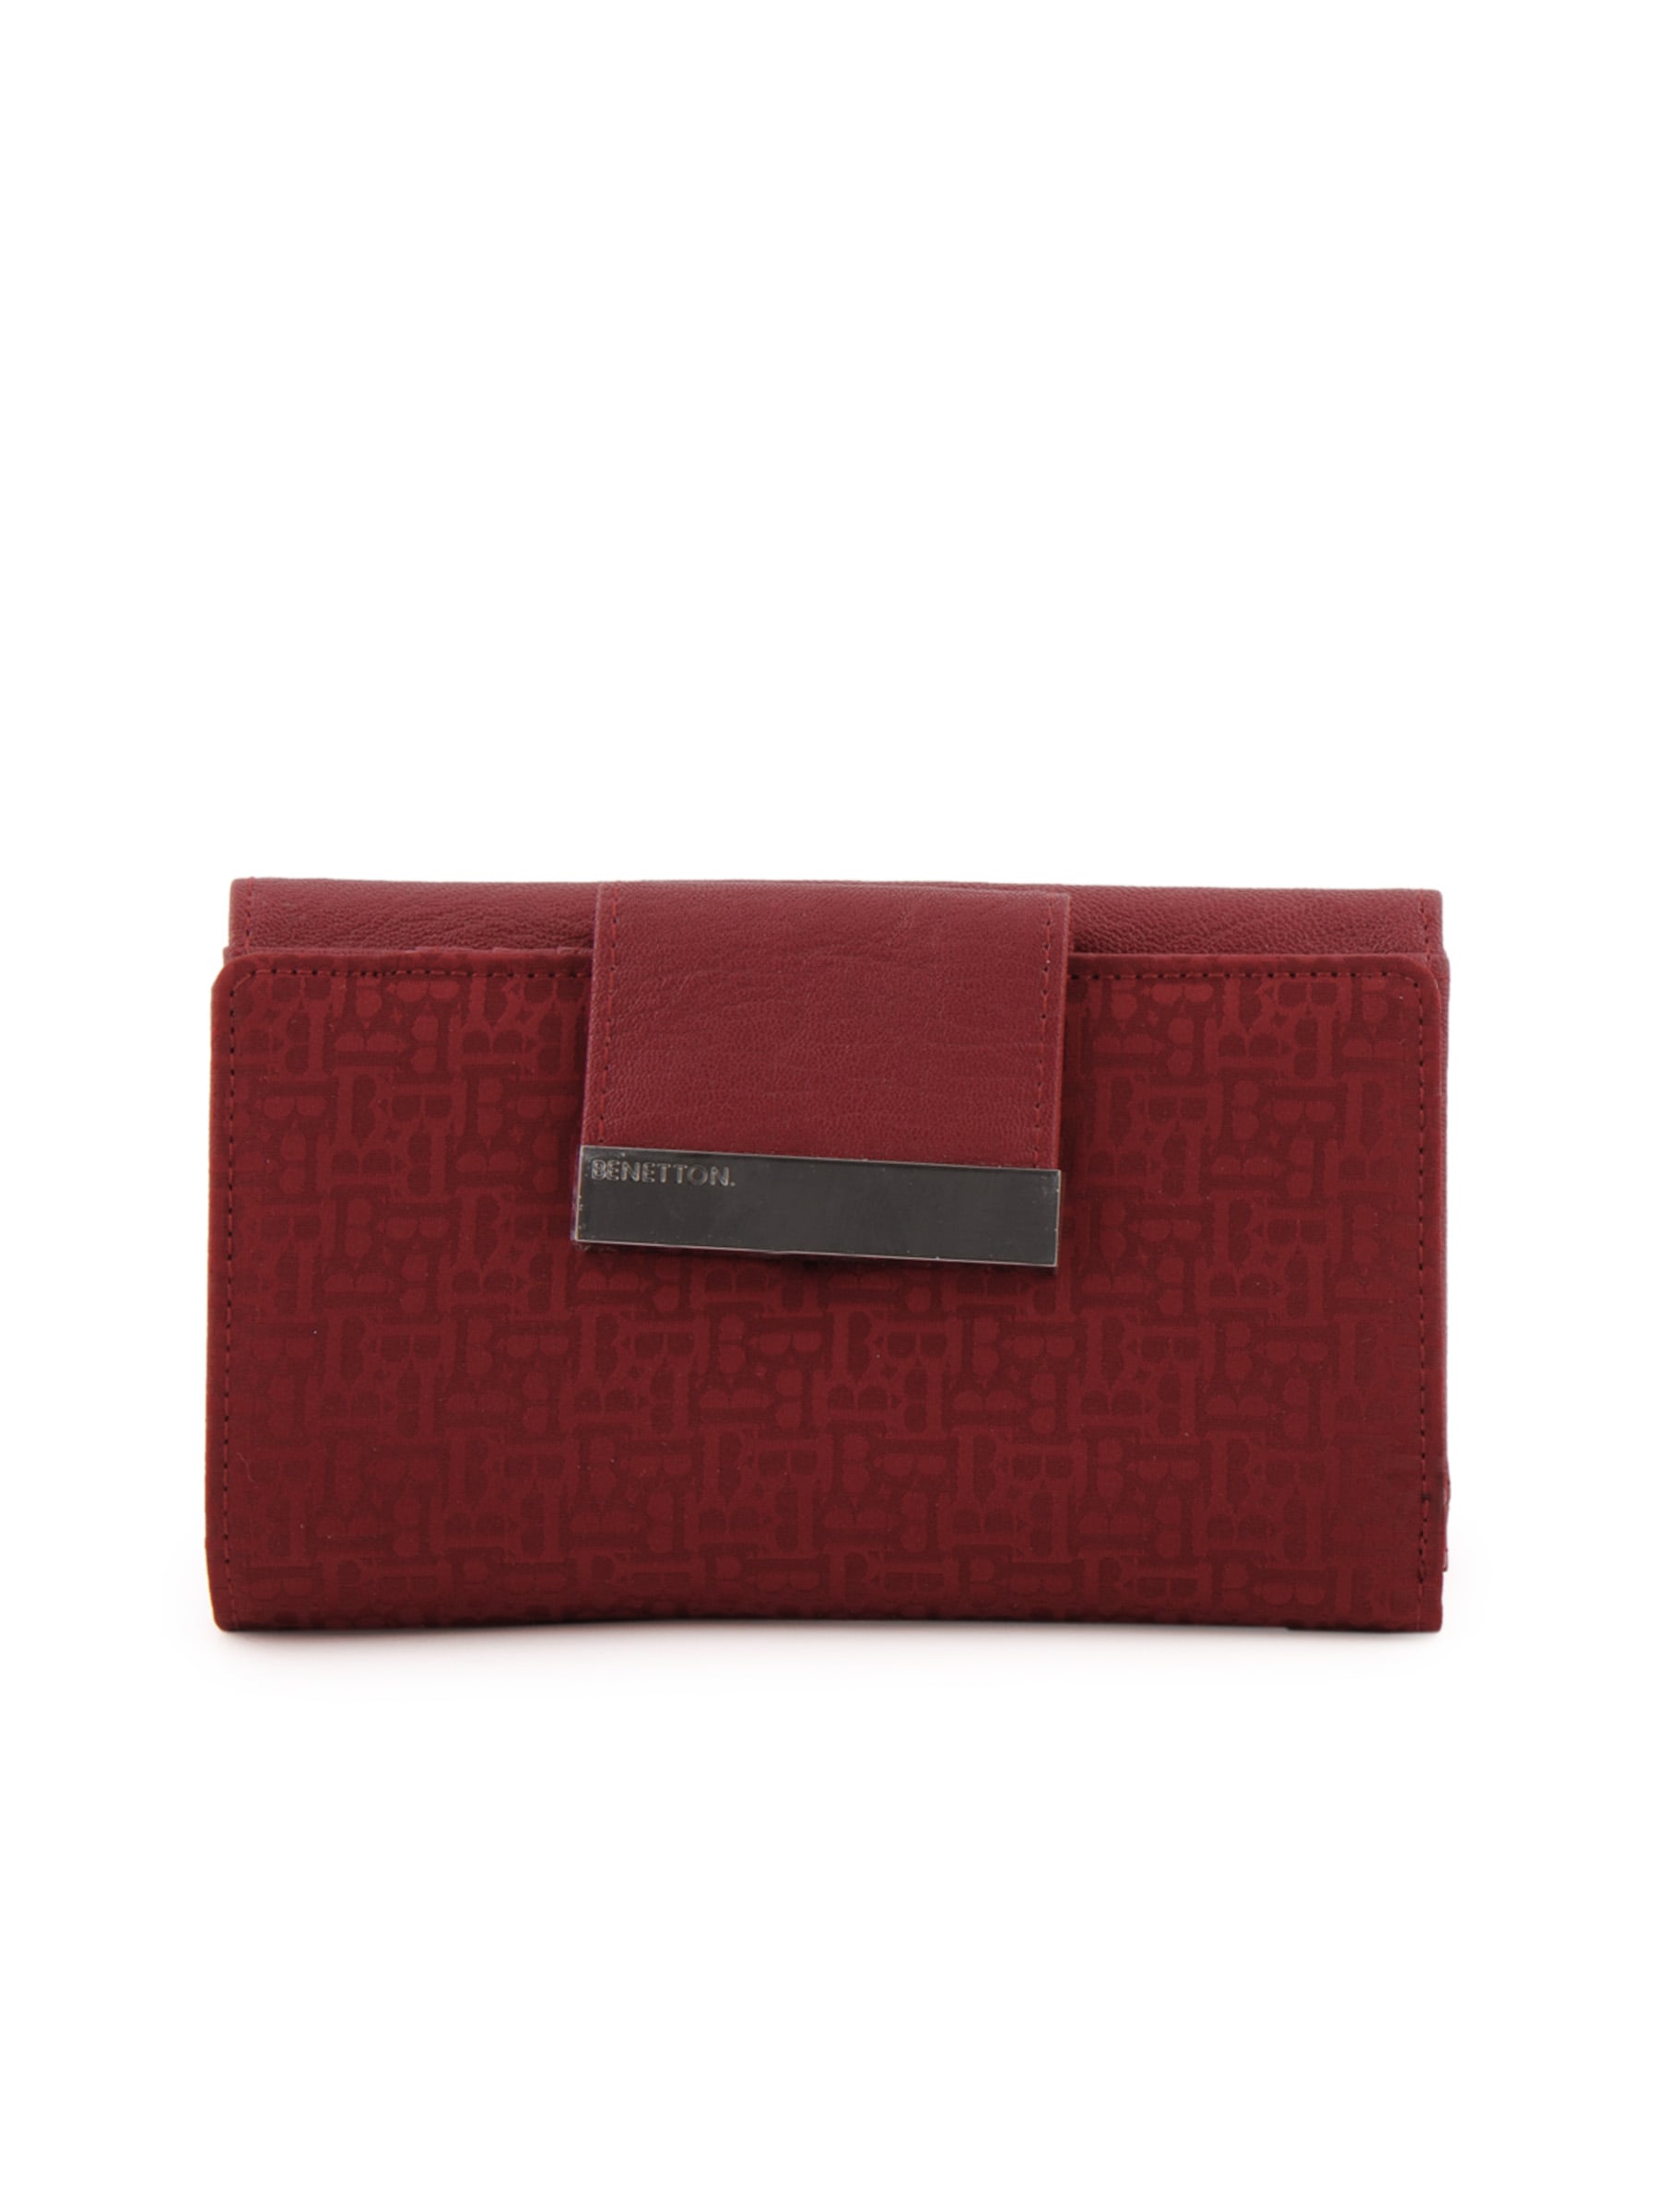 United Colors of Benetton Women Solid Maroon Wallets